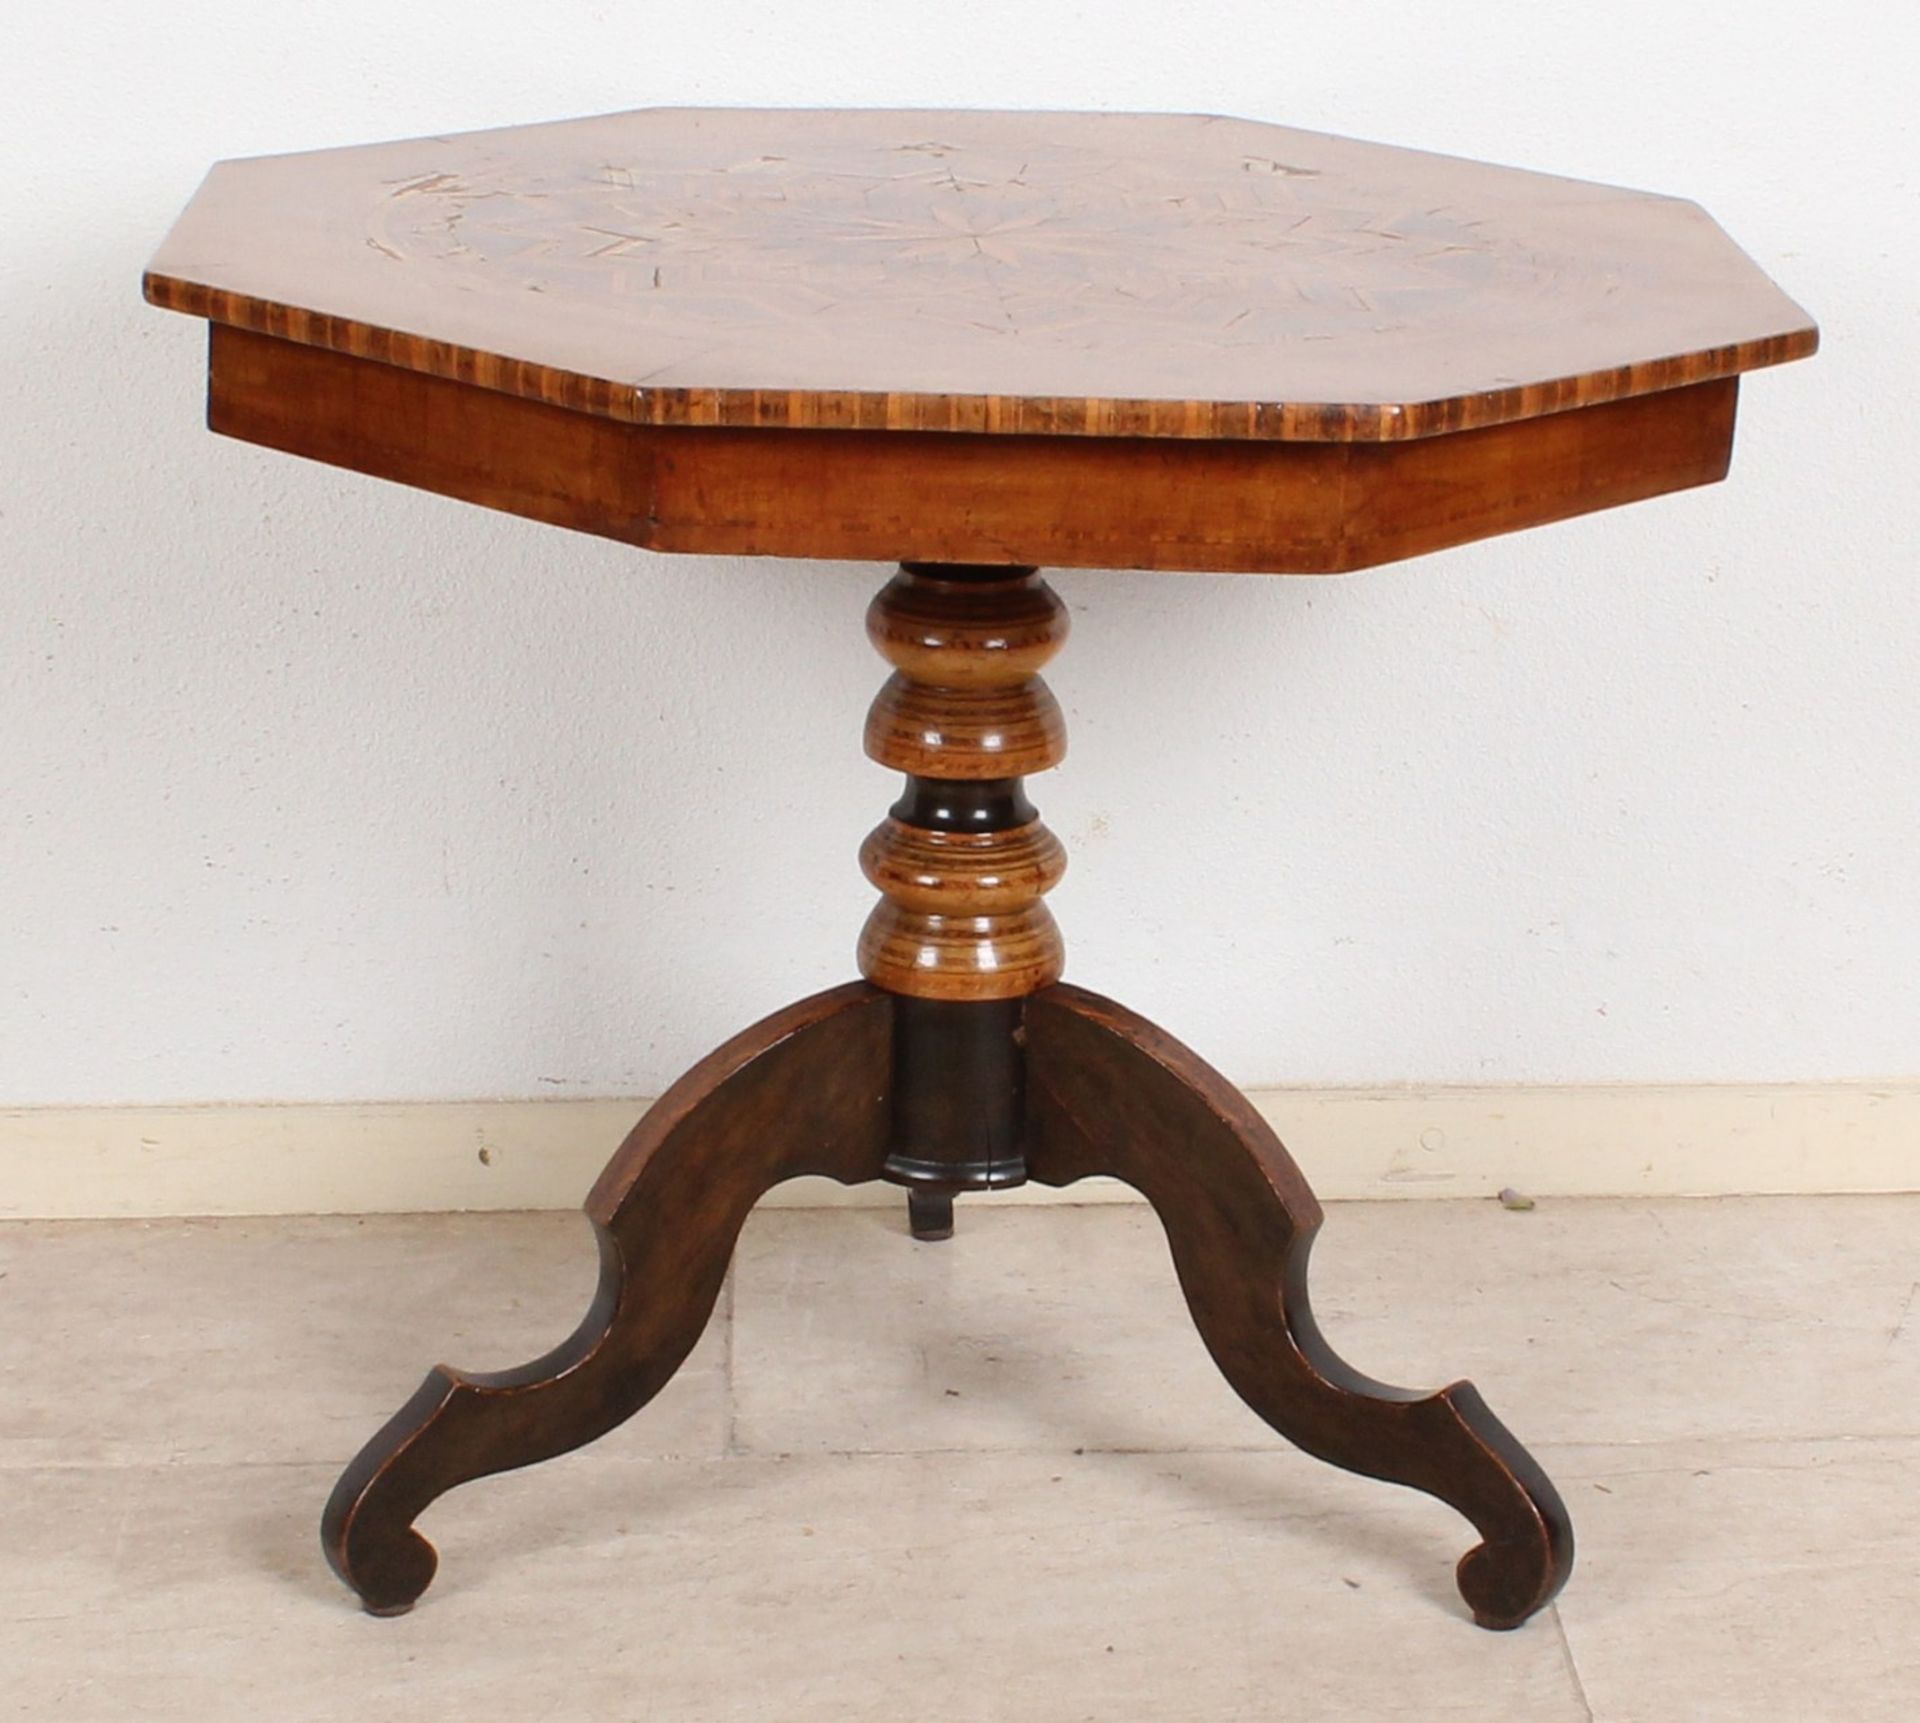 Nineteenth century table with marquetry, inlaid walnut on top and 3spant leg, around 1840, octagonal